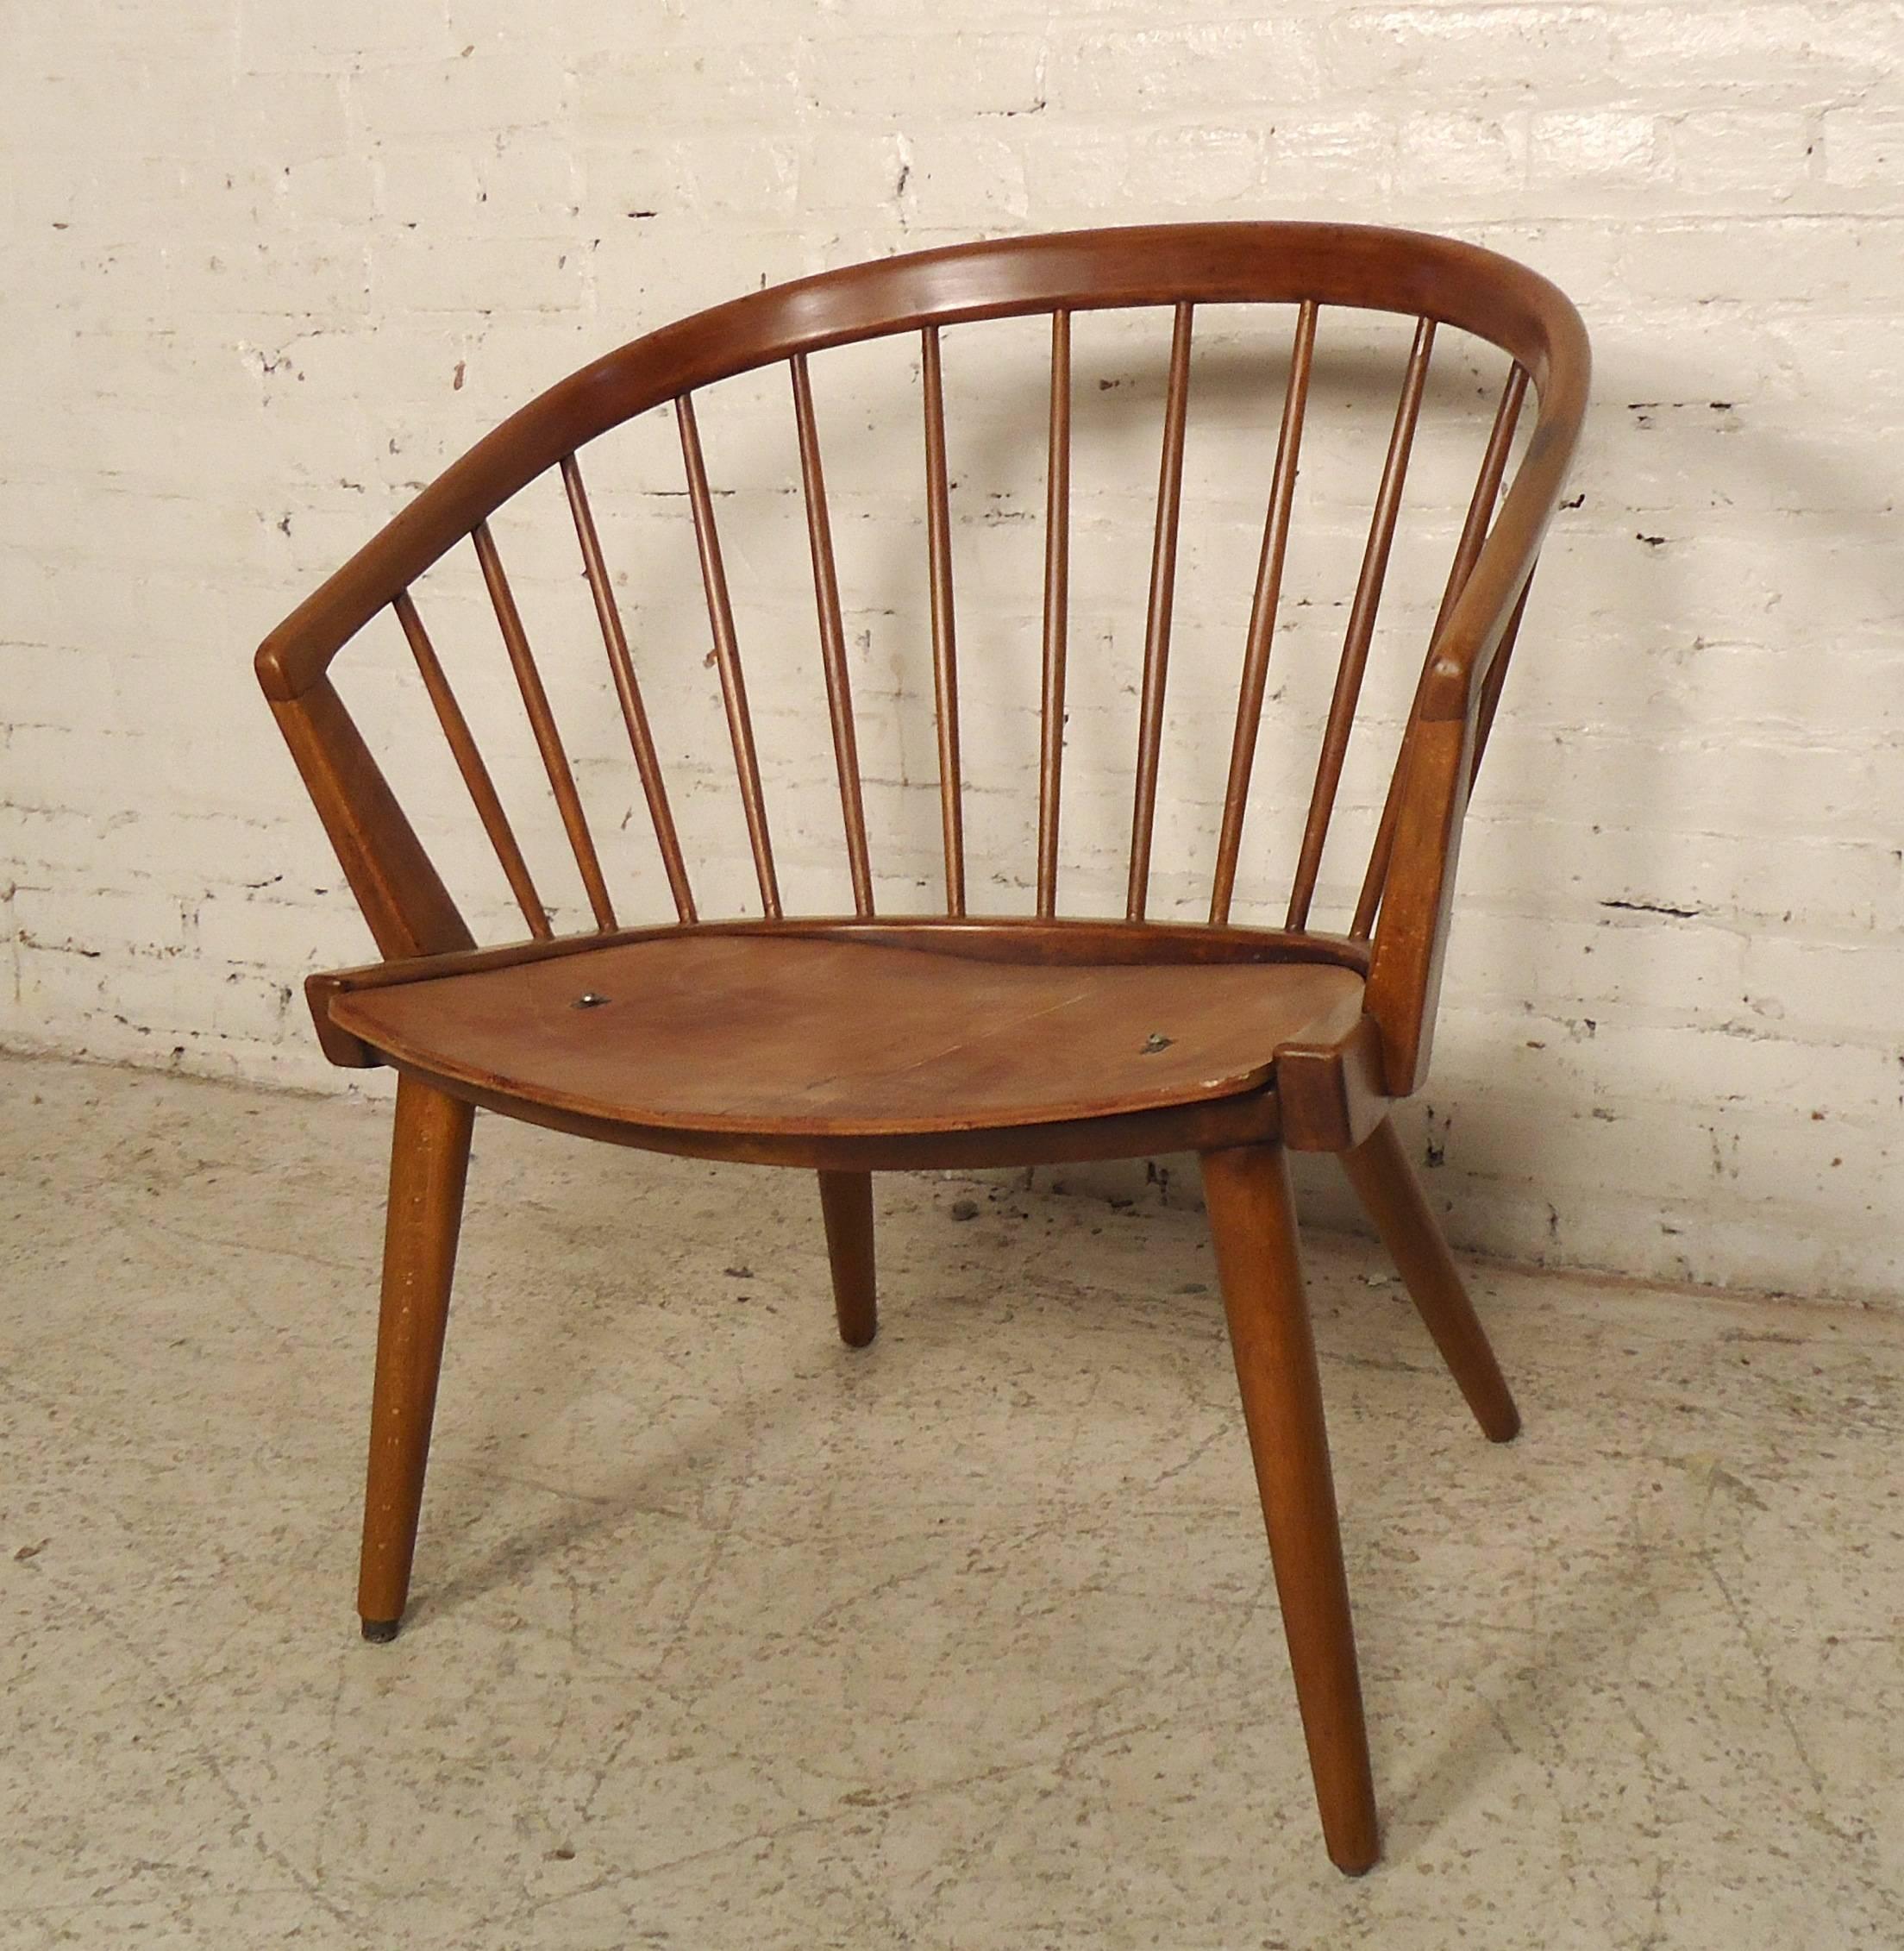 This beautiful Mid-Century Modern chair is made of rich teak grain in this Hans Wegner style frame. Stands on tapered legs, has a wide seat and rounded back rest with round spindles.

Please confirm item location (NY or NJ.)